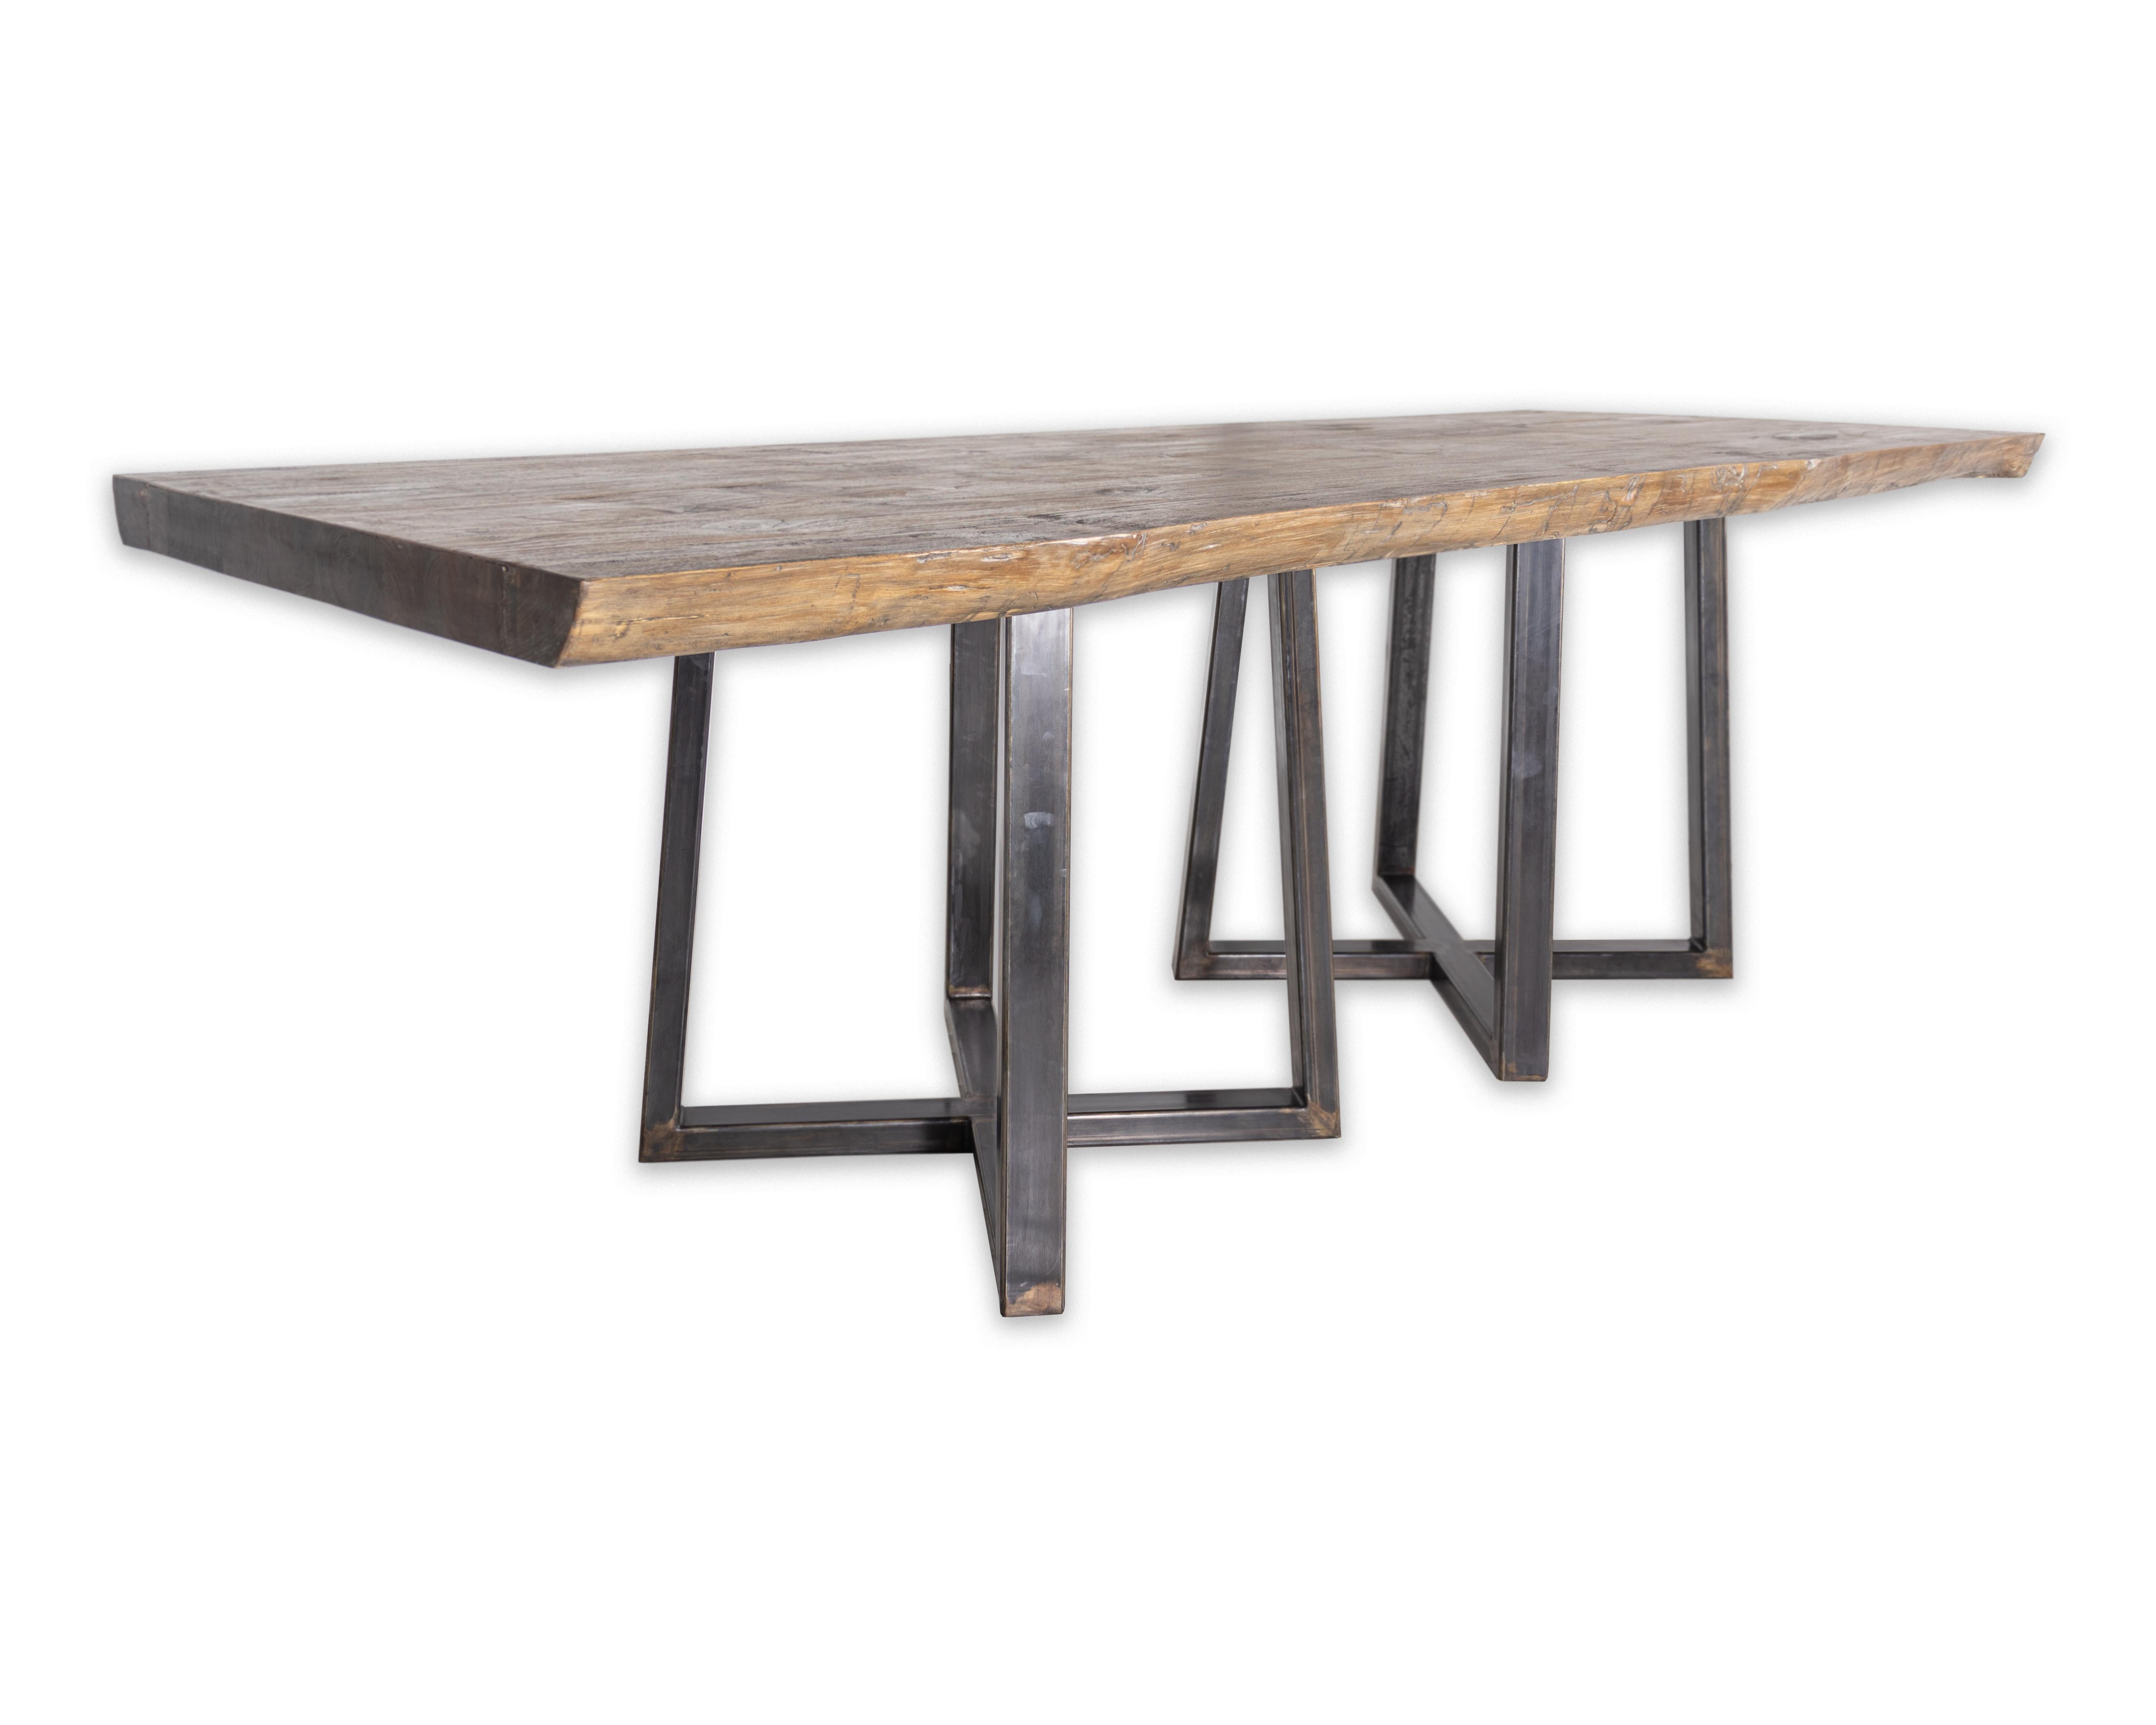 Cross Design Ebonized patina steel base with live edge wood table top

Table top is a piece from our one of kind line, Le Monde. Bases are from our custom line, Vision and Design. Both exclusive to Brendan Bass.
    